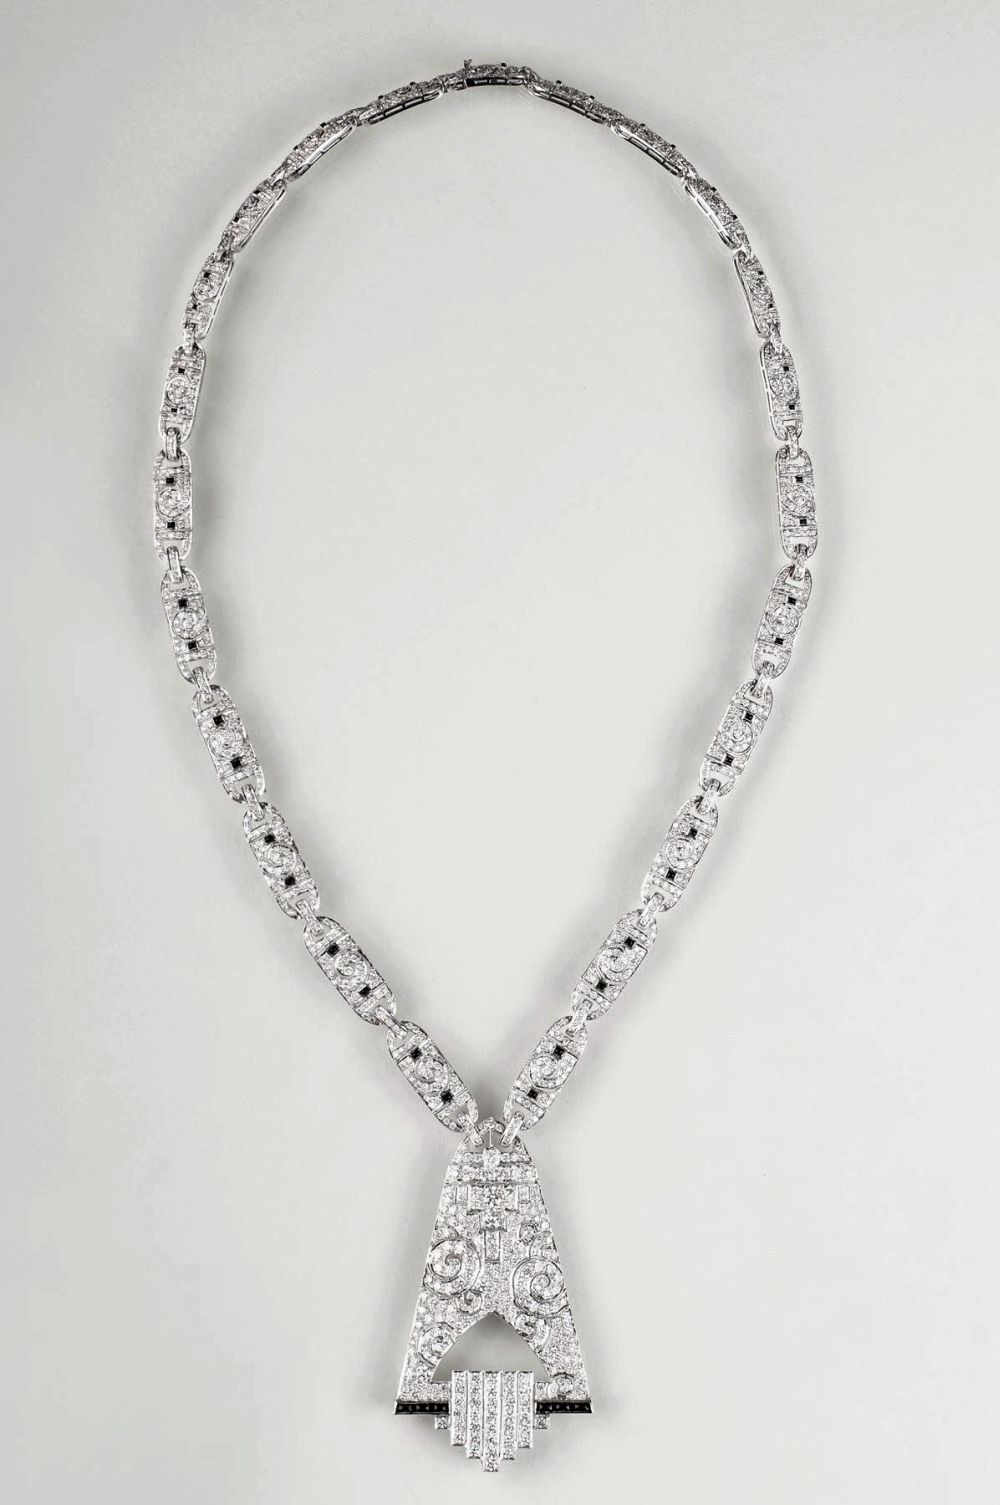 An exceptional, highcarat Diamond Necklace in Art-déco style - image 3